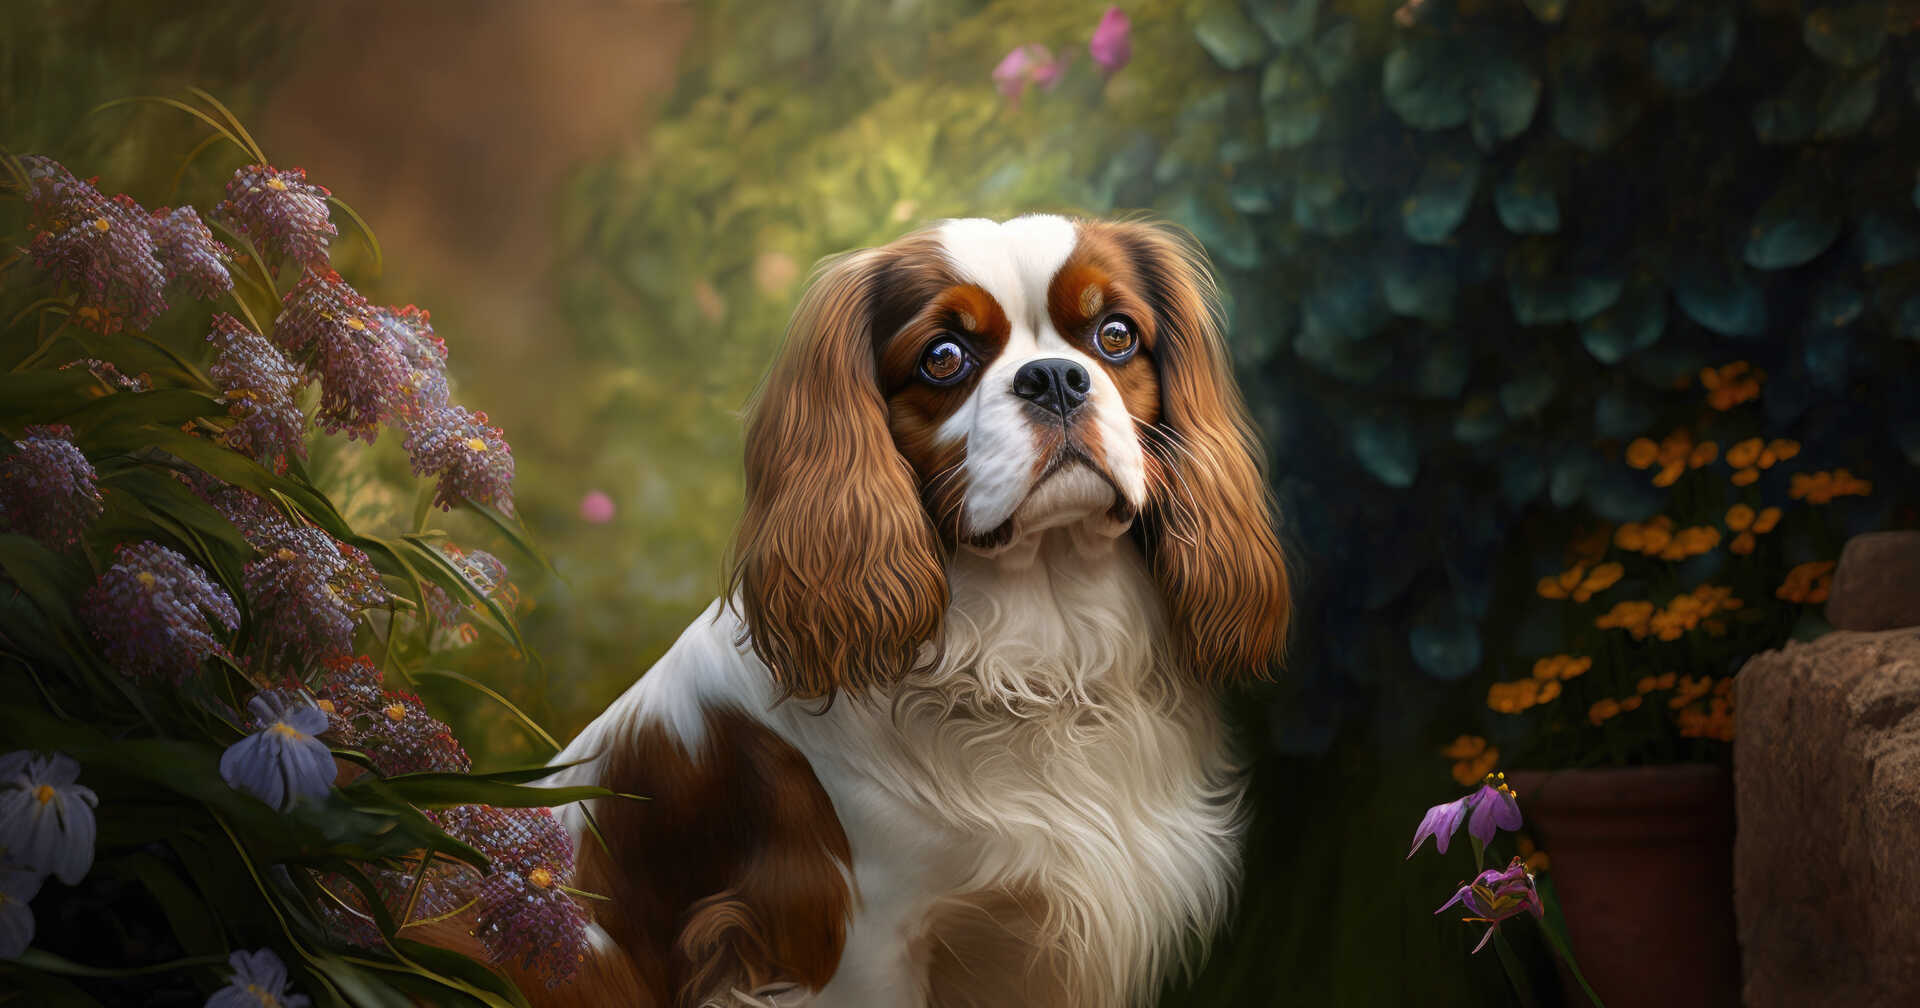 King Charles Cavalier Spaniel dog sitting in front of flowers